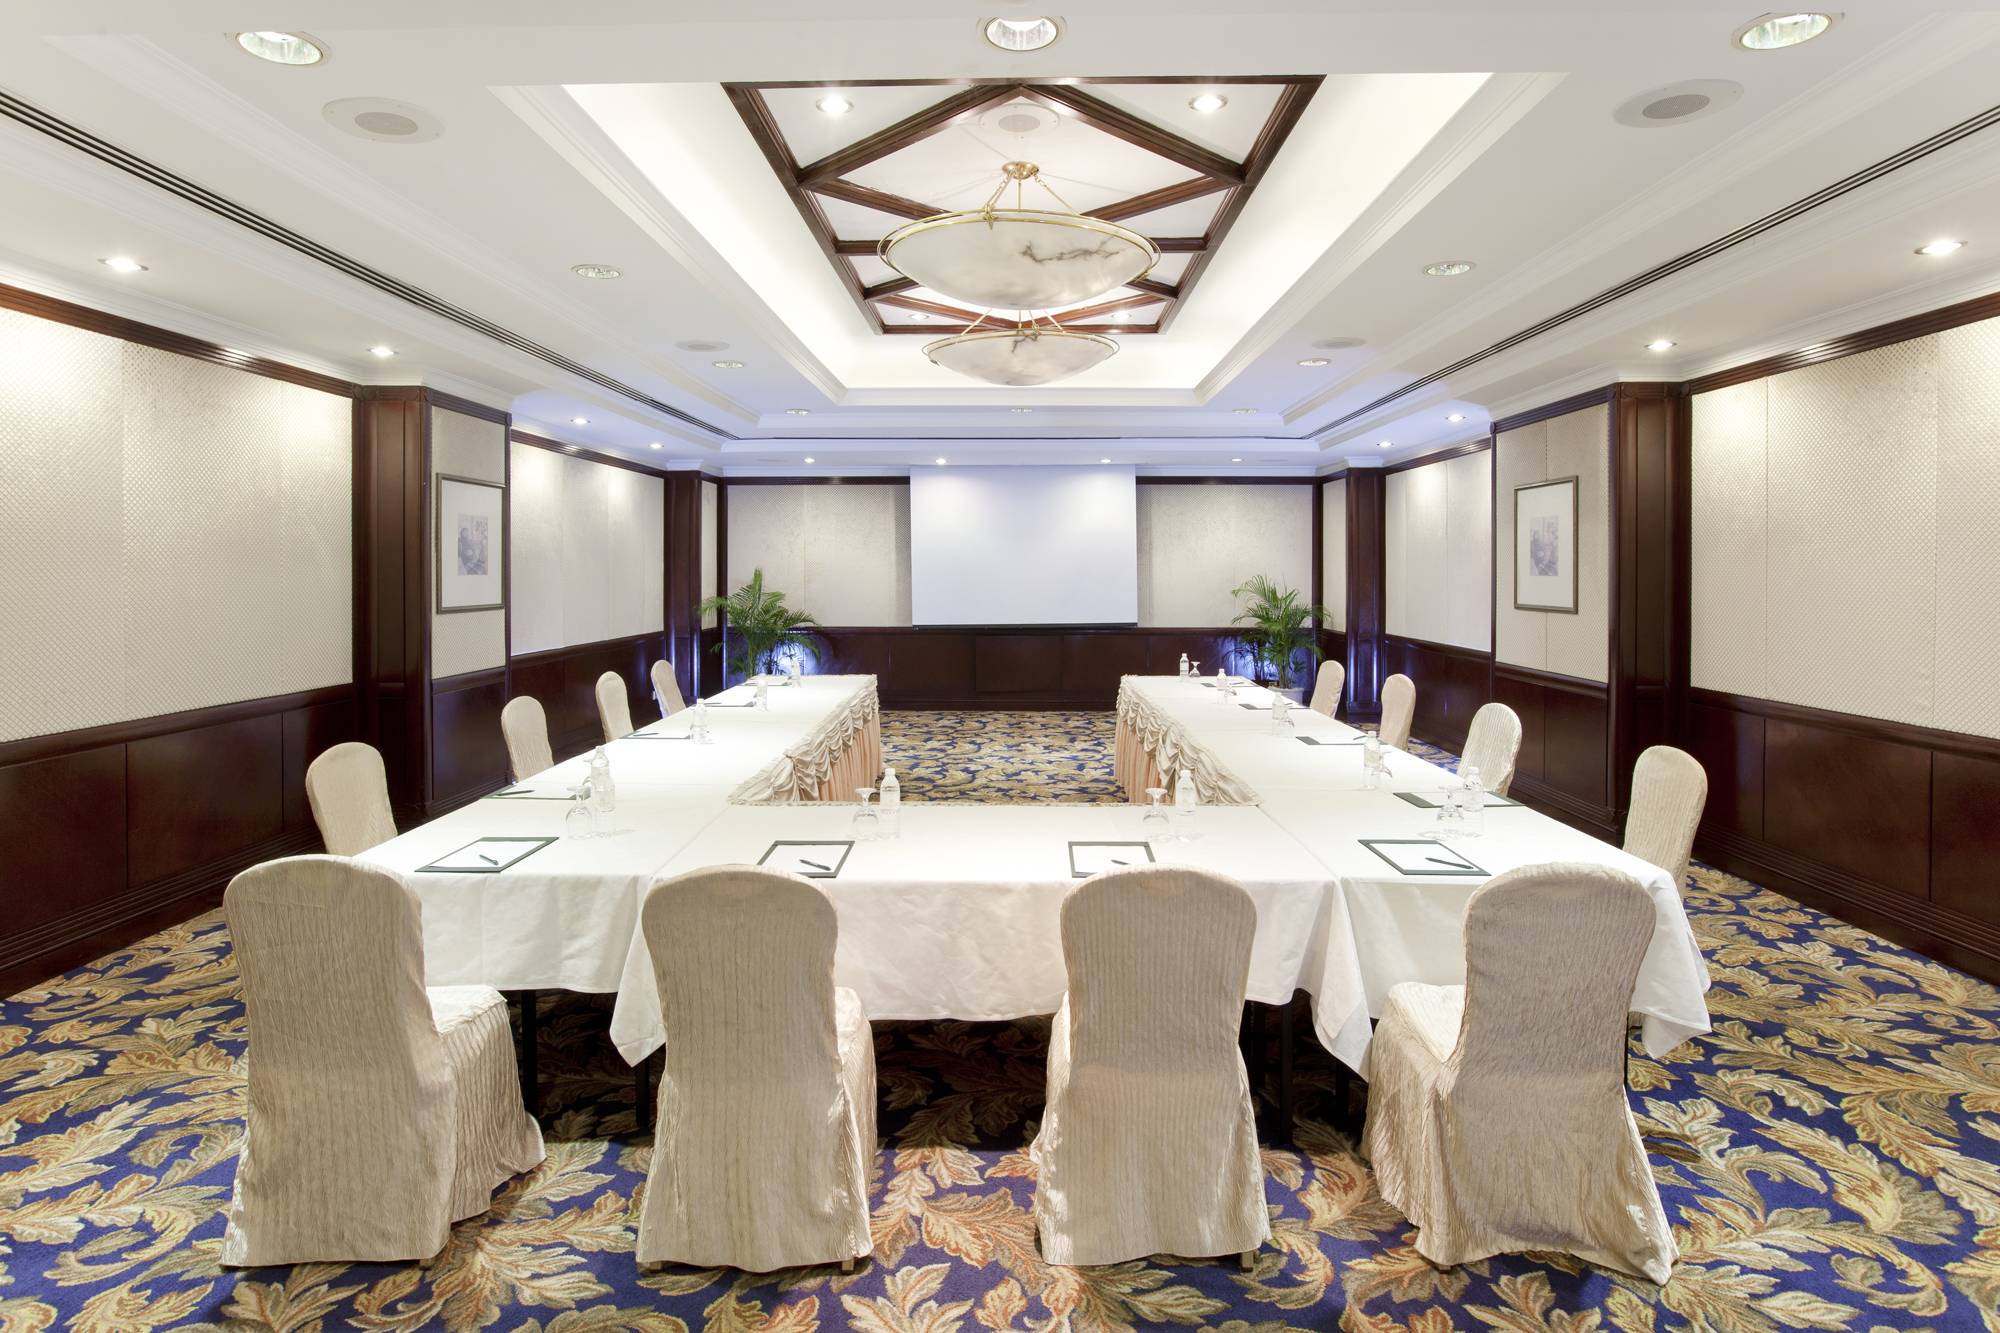 Meeting room designed to have an effective meeting